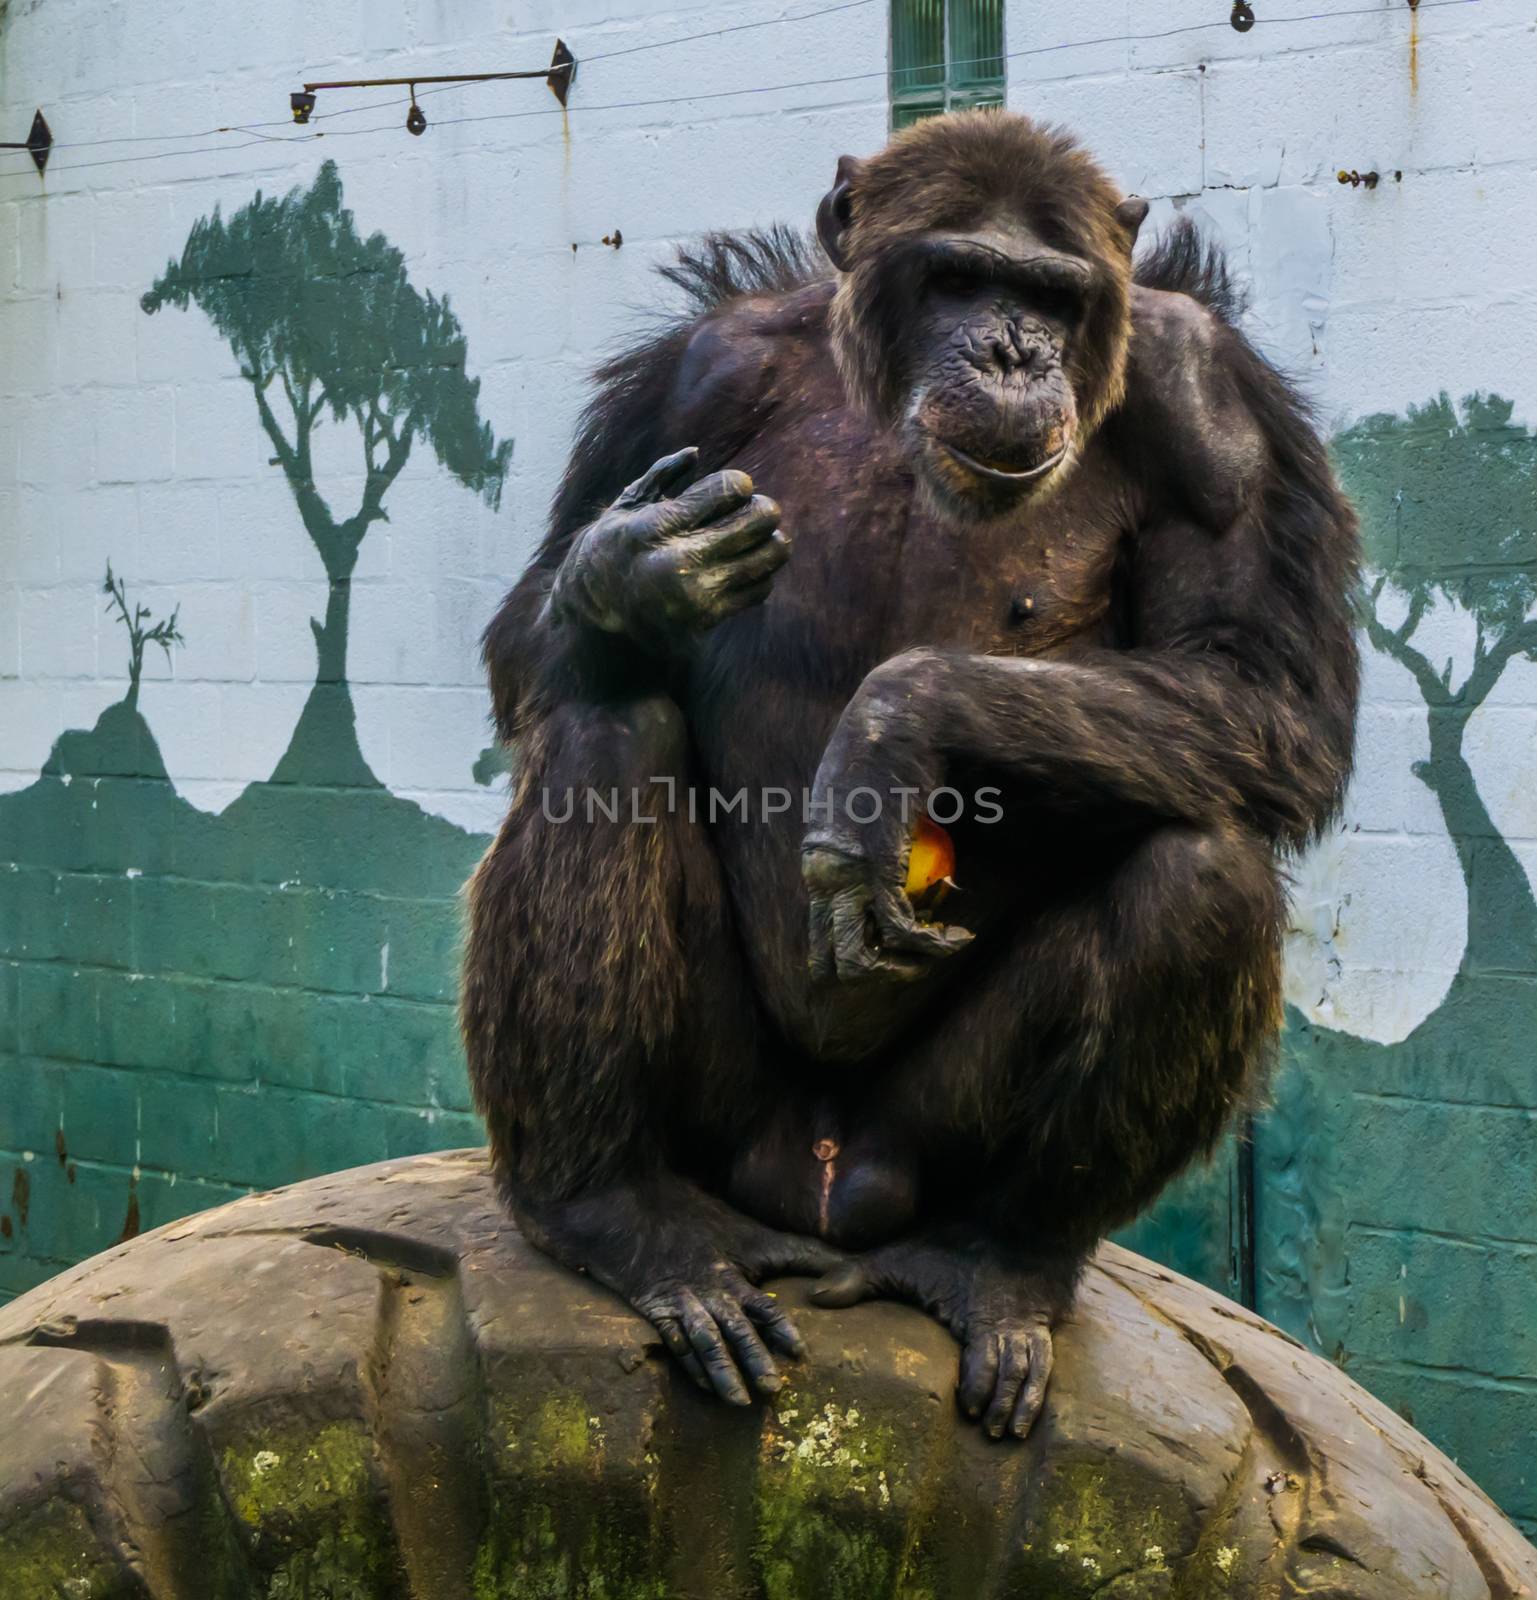 portrait of a big black chimpanzee sitting a car tire and holding a apple, Endangered primate from Africa